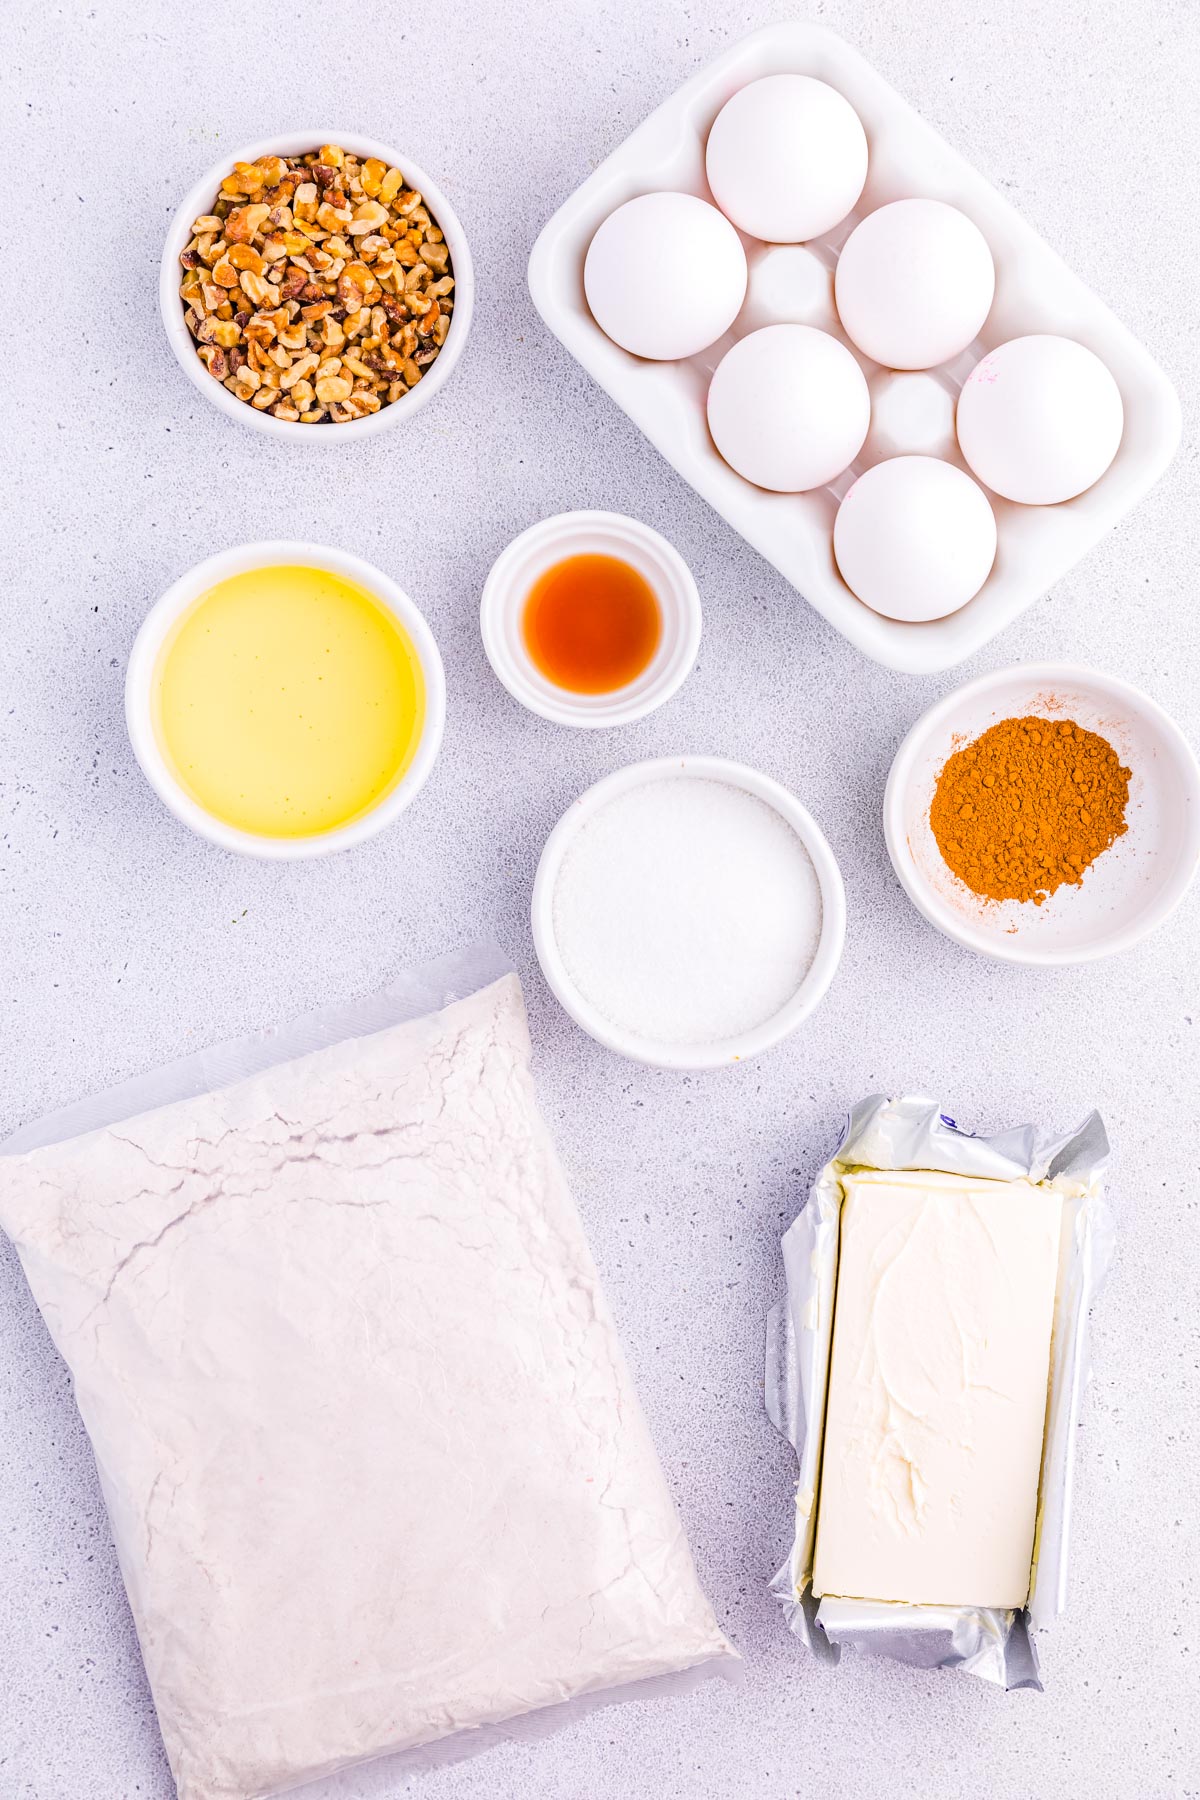 All of the ingredients needed to make these carrot cake bars.